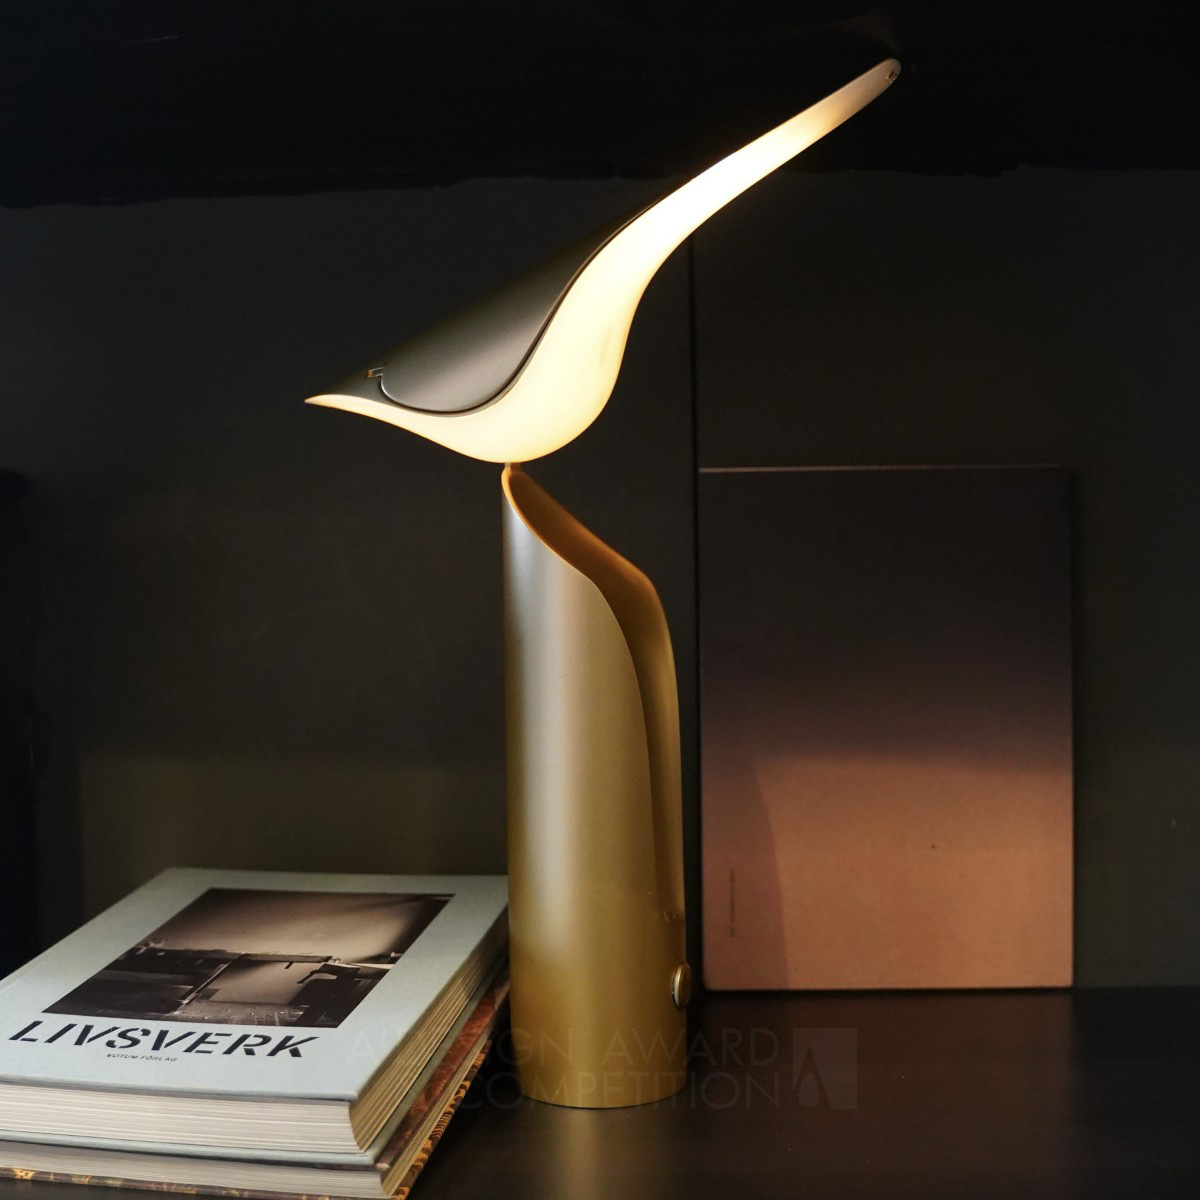 Magpie Table Lamp by Sha Yang, Kaifeng Zheng and Yang Ma Silver Lighting Products and Fixtures Design Award Winner 2022 